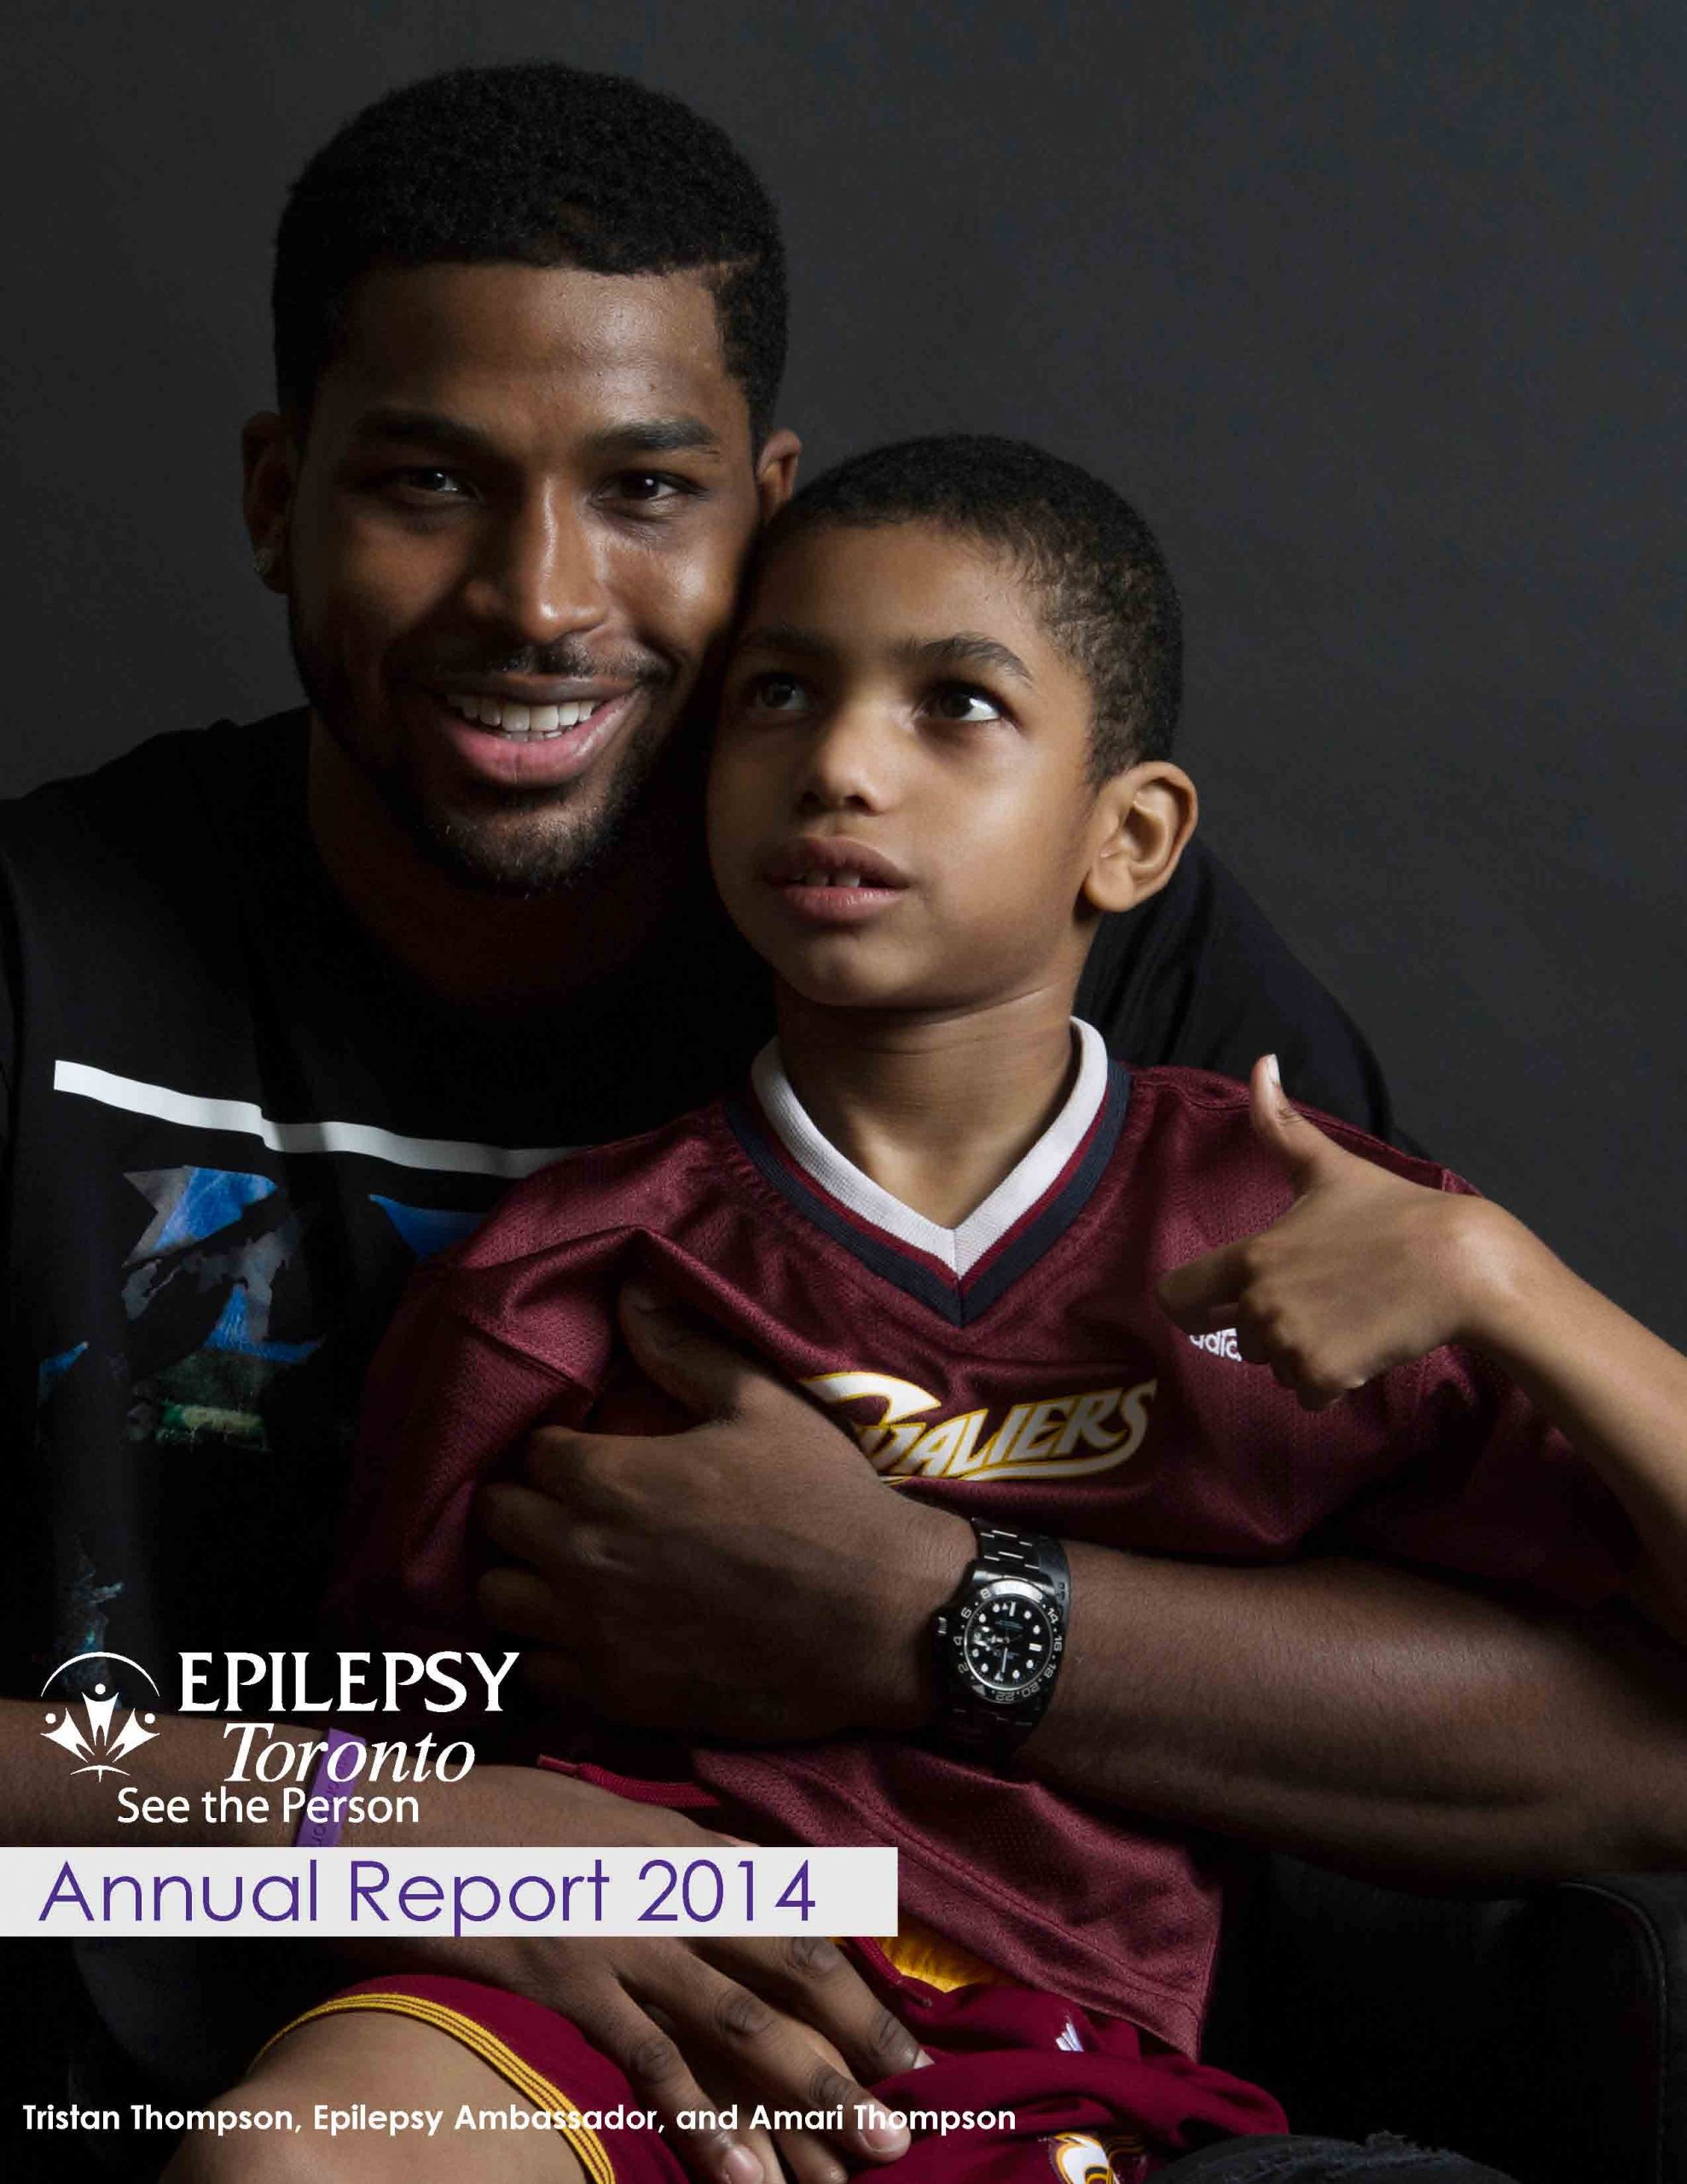 Photo of Tristan Thompson and Amari Thompson on cover page of Epilepsy Toronto 2014 Annual Report